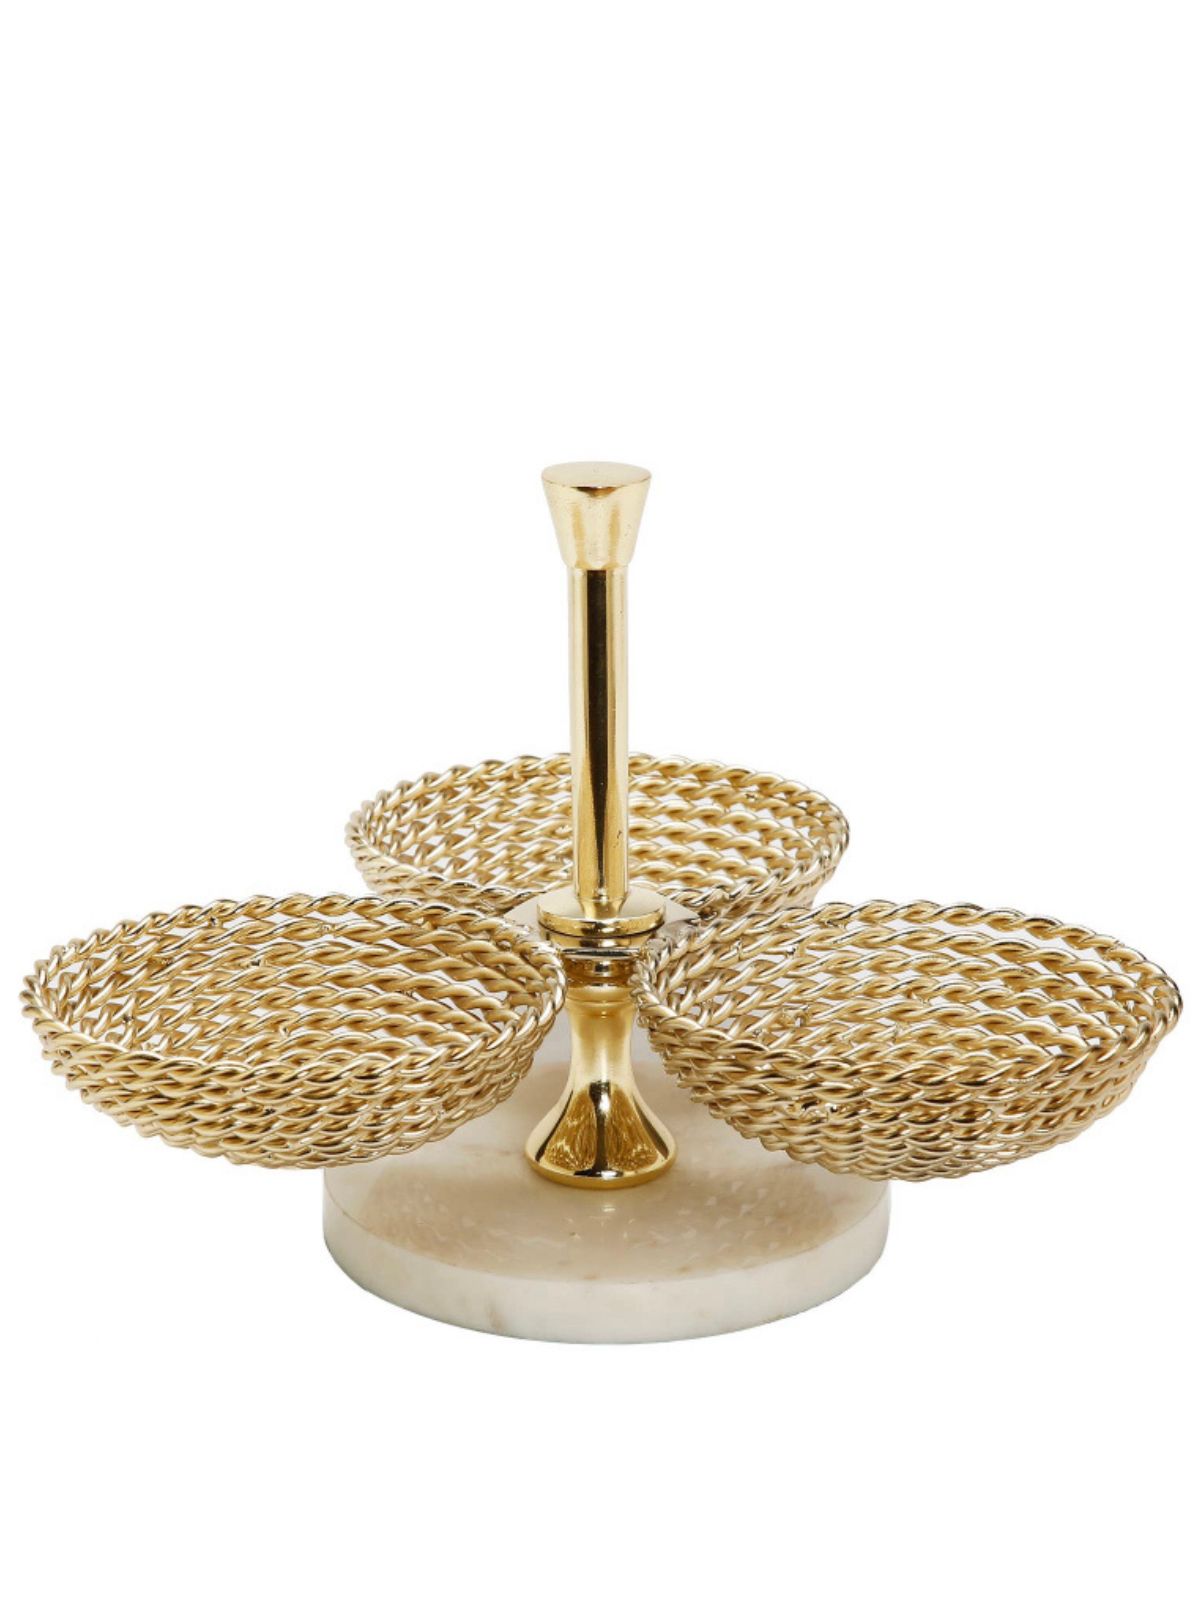 Beautify your table setting with the Cordon Gold Triple Bowl Dish with Marble Base. It is useful as a serving bowl, and can also be enjoyed as a centerpiece dish.